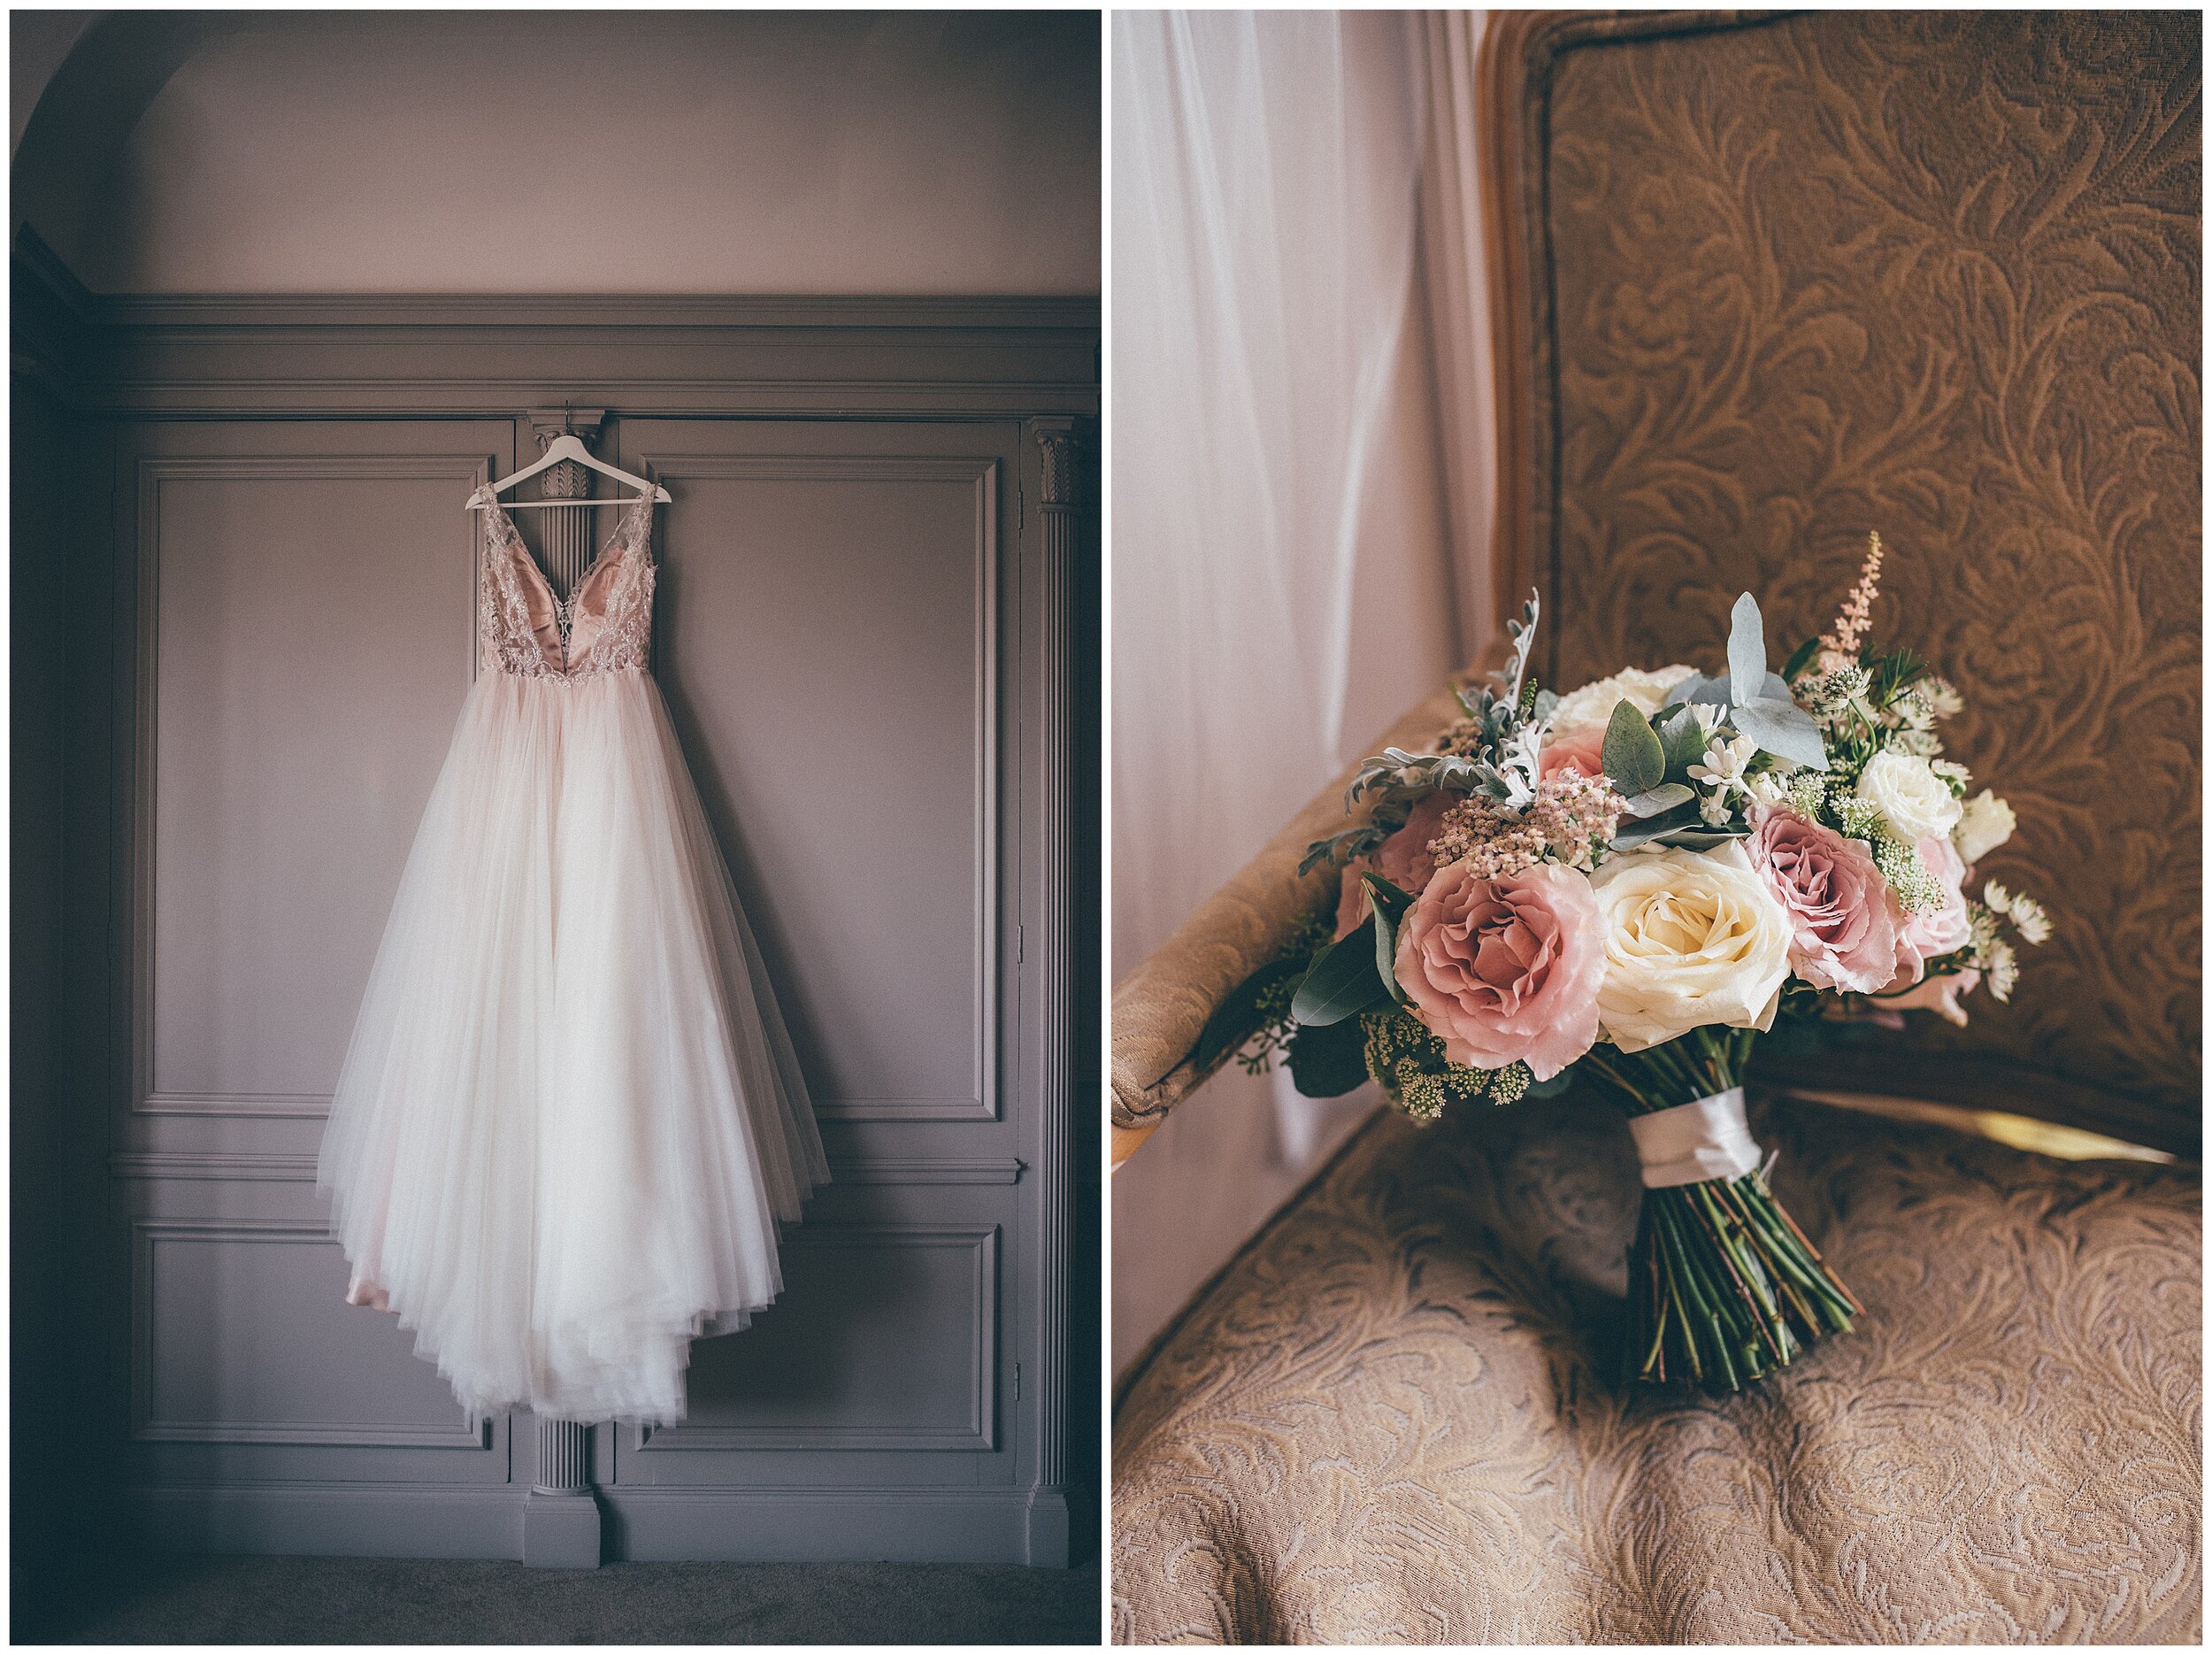 Bride's incredible gown and beautiful flowers in the bridal suite at Thornton Manor.